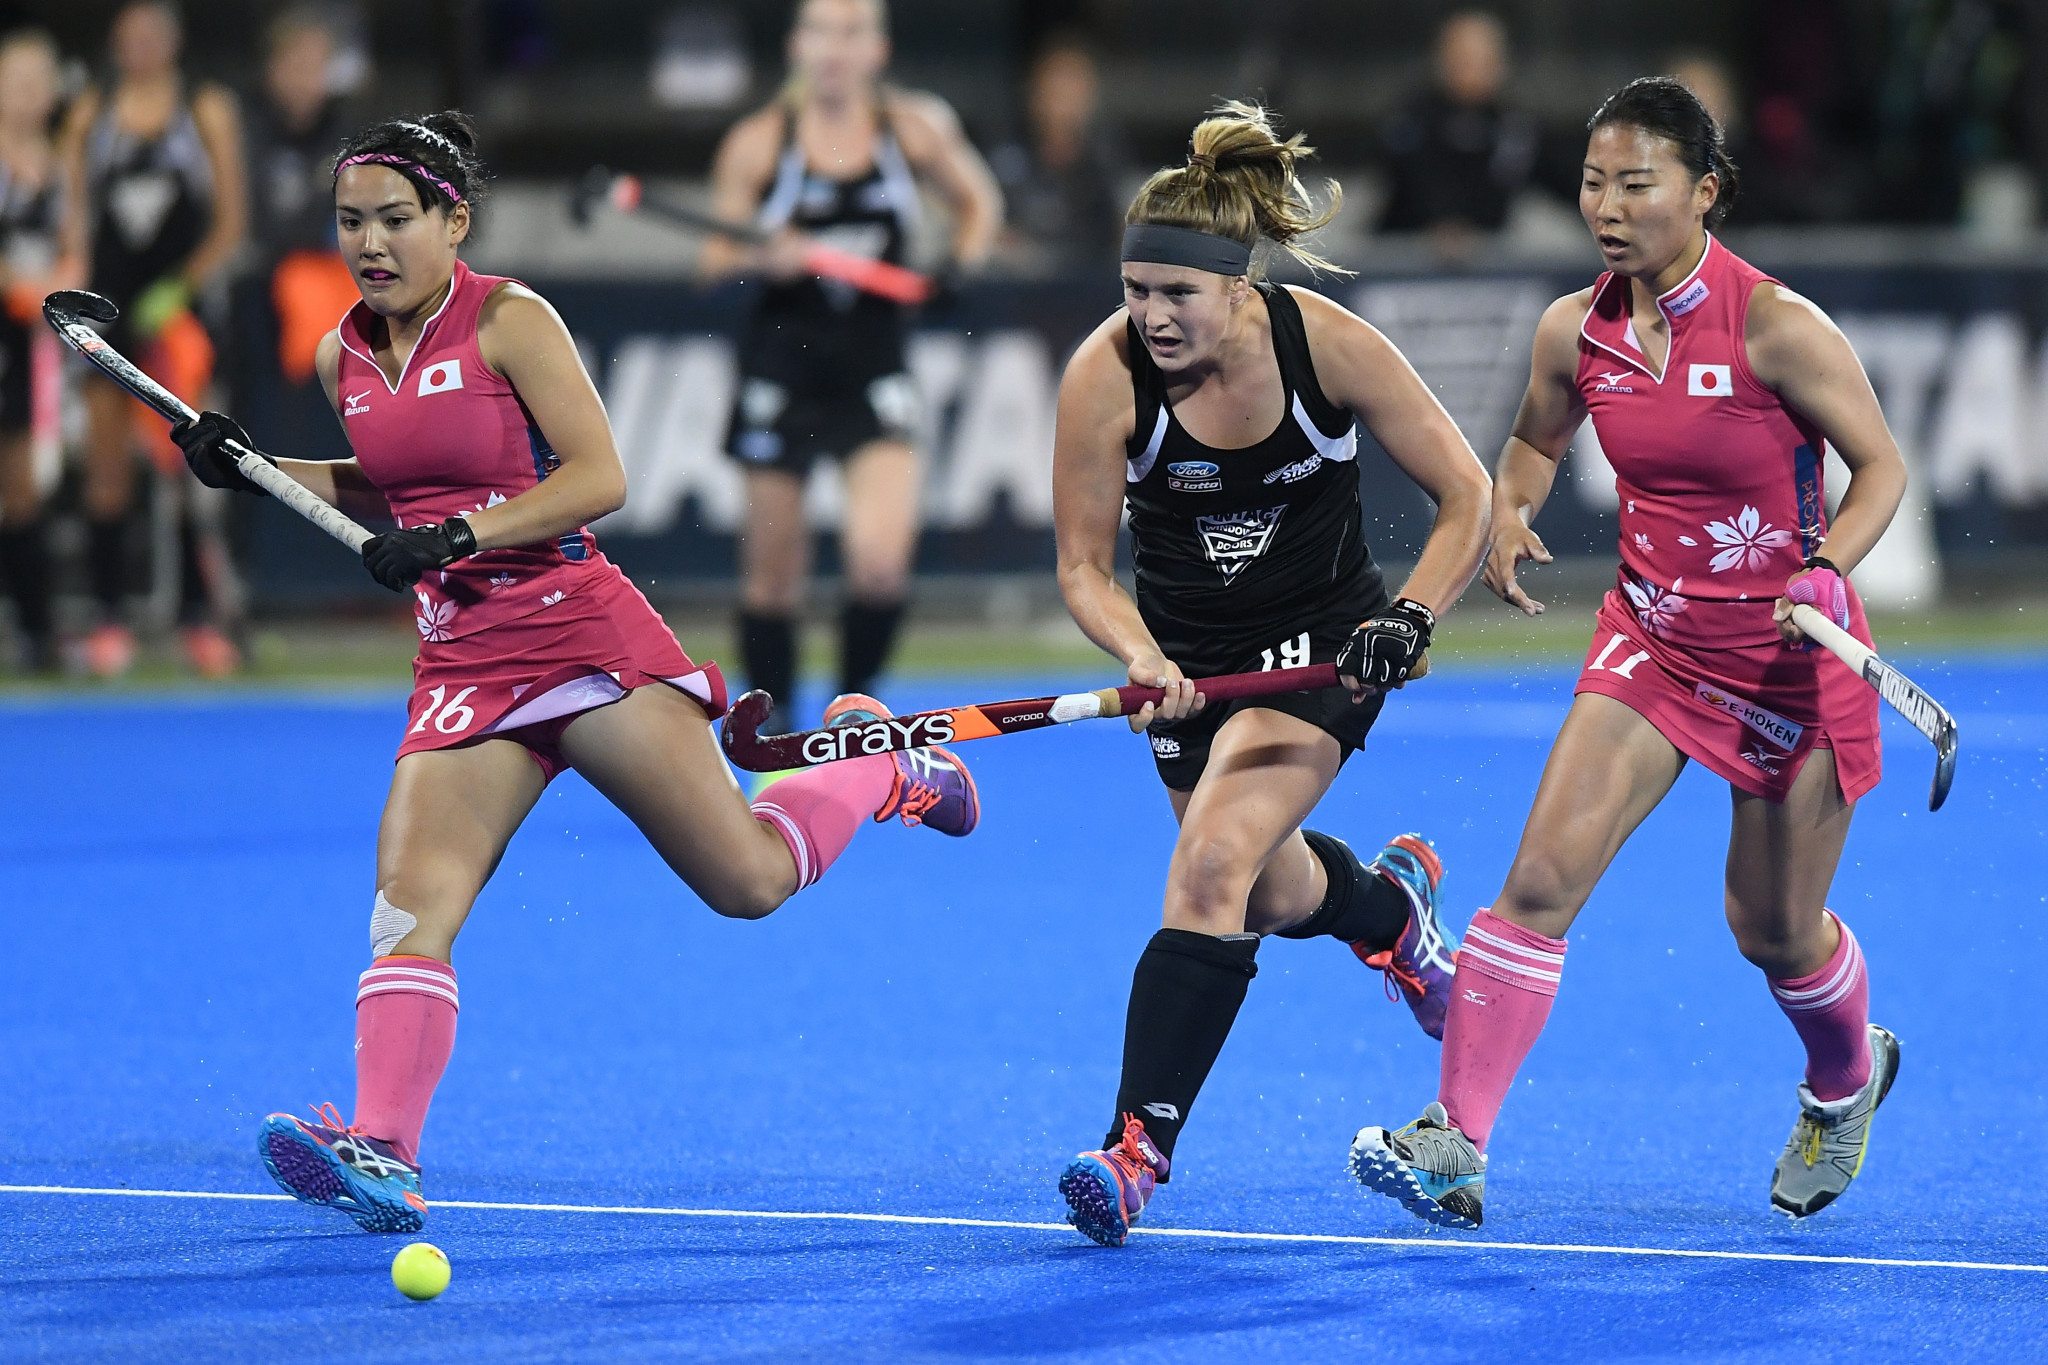 The exact reasons behind Tessa Jopp's withdrawal from New Zealand's hockey team have not been revealed ©Getty Images